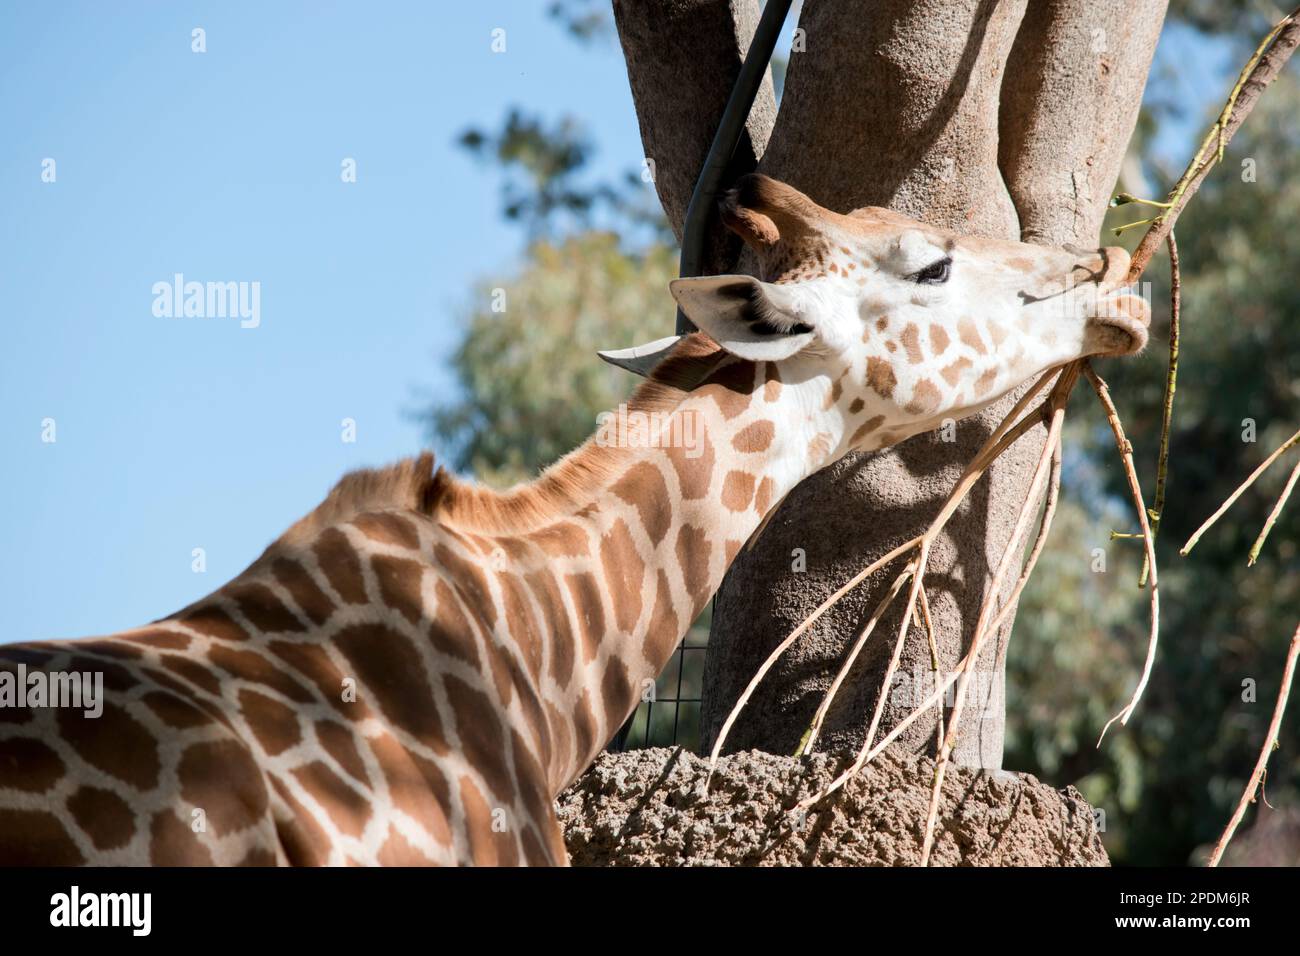 the guraffe is tallest land mammal, with a neck as long as 6 feet, the giraffe is also well known for the unique brown and cream pattern on its coat a Stock Photo